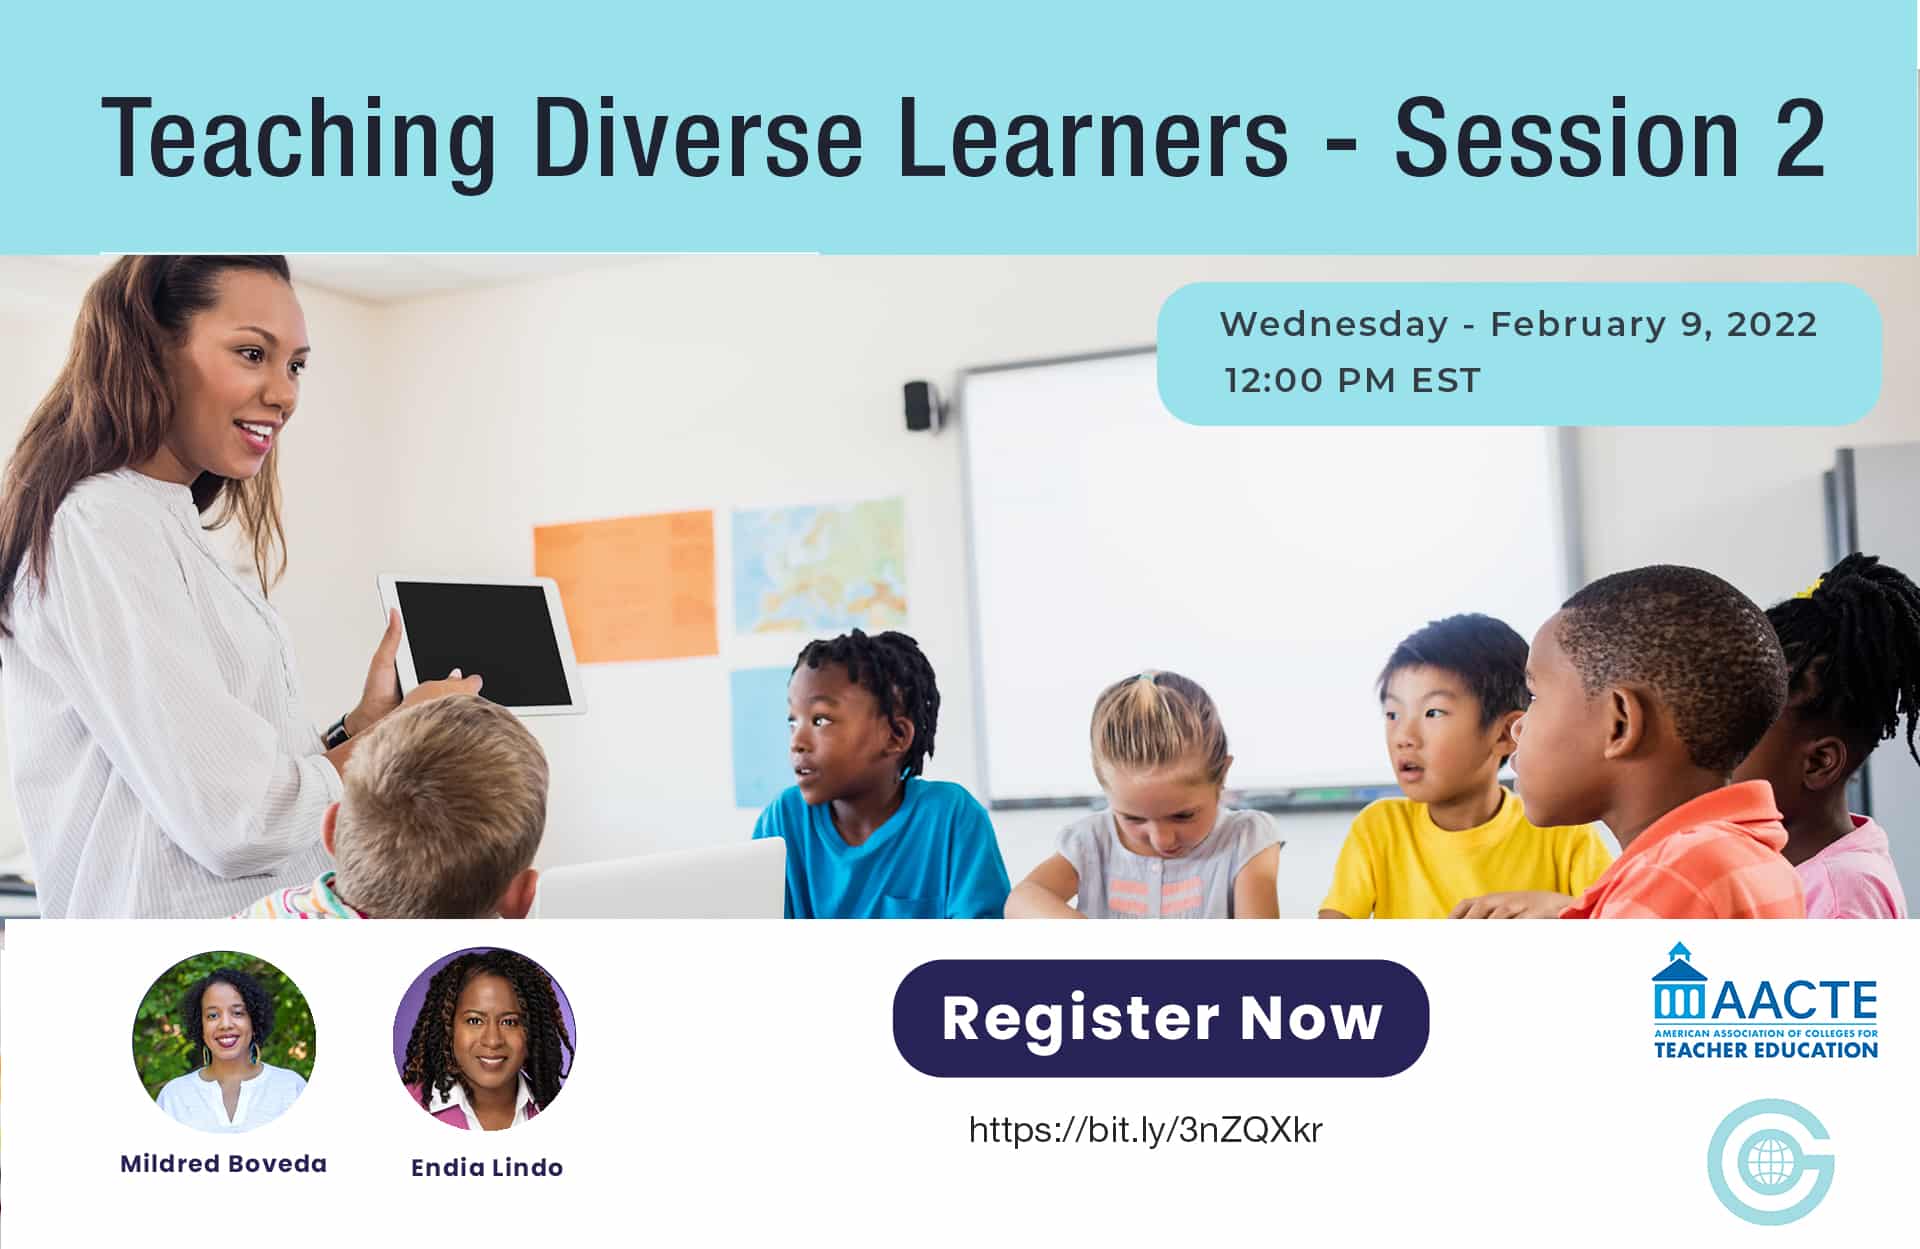 GSoLEN and AACTE Webinar On Teaching Diverse Learners, Session 2